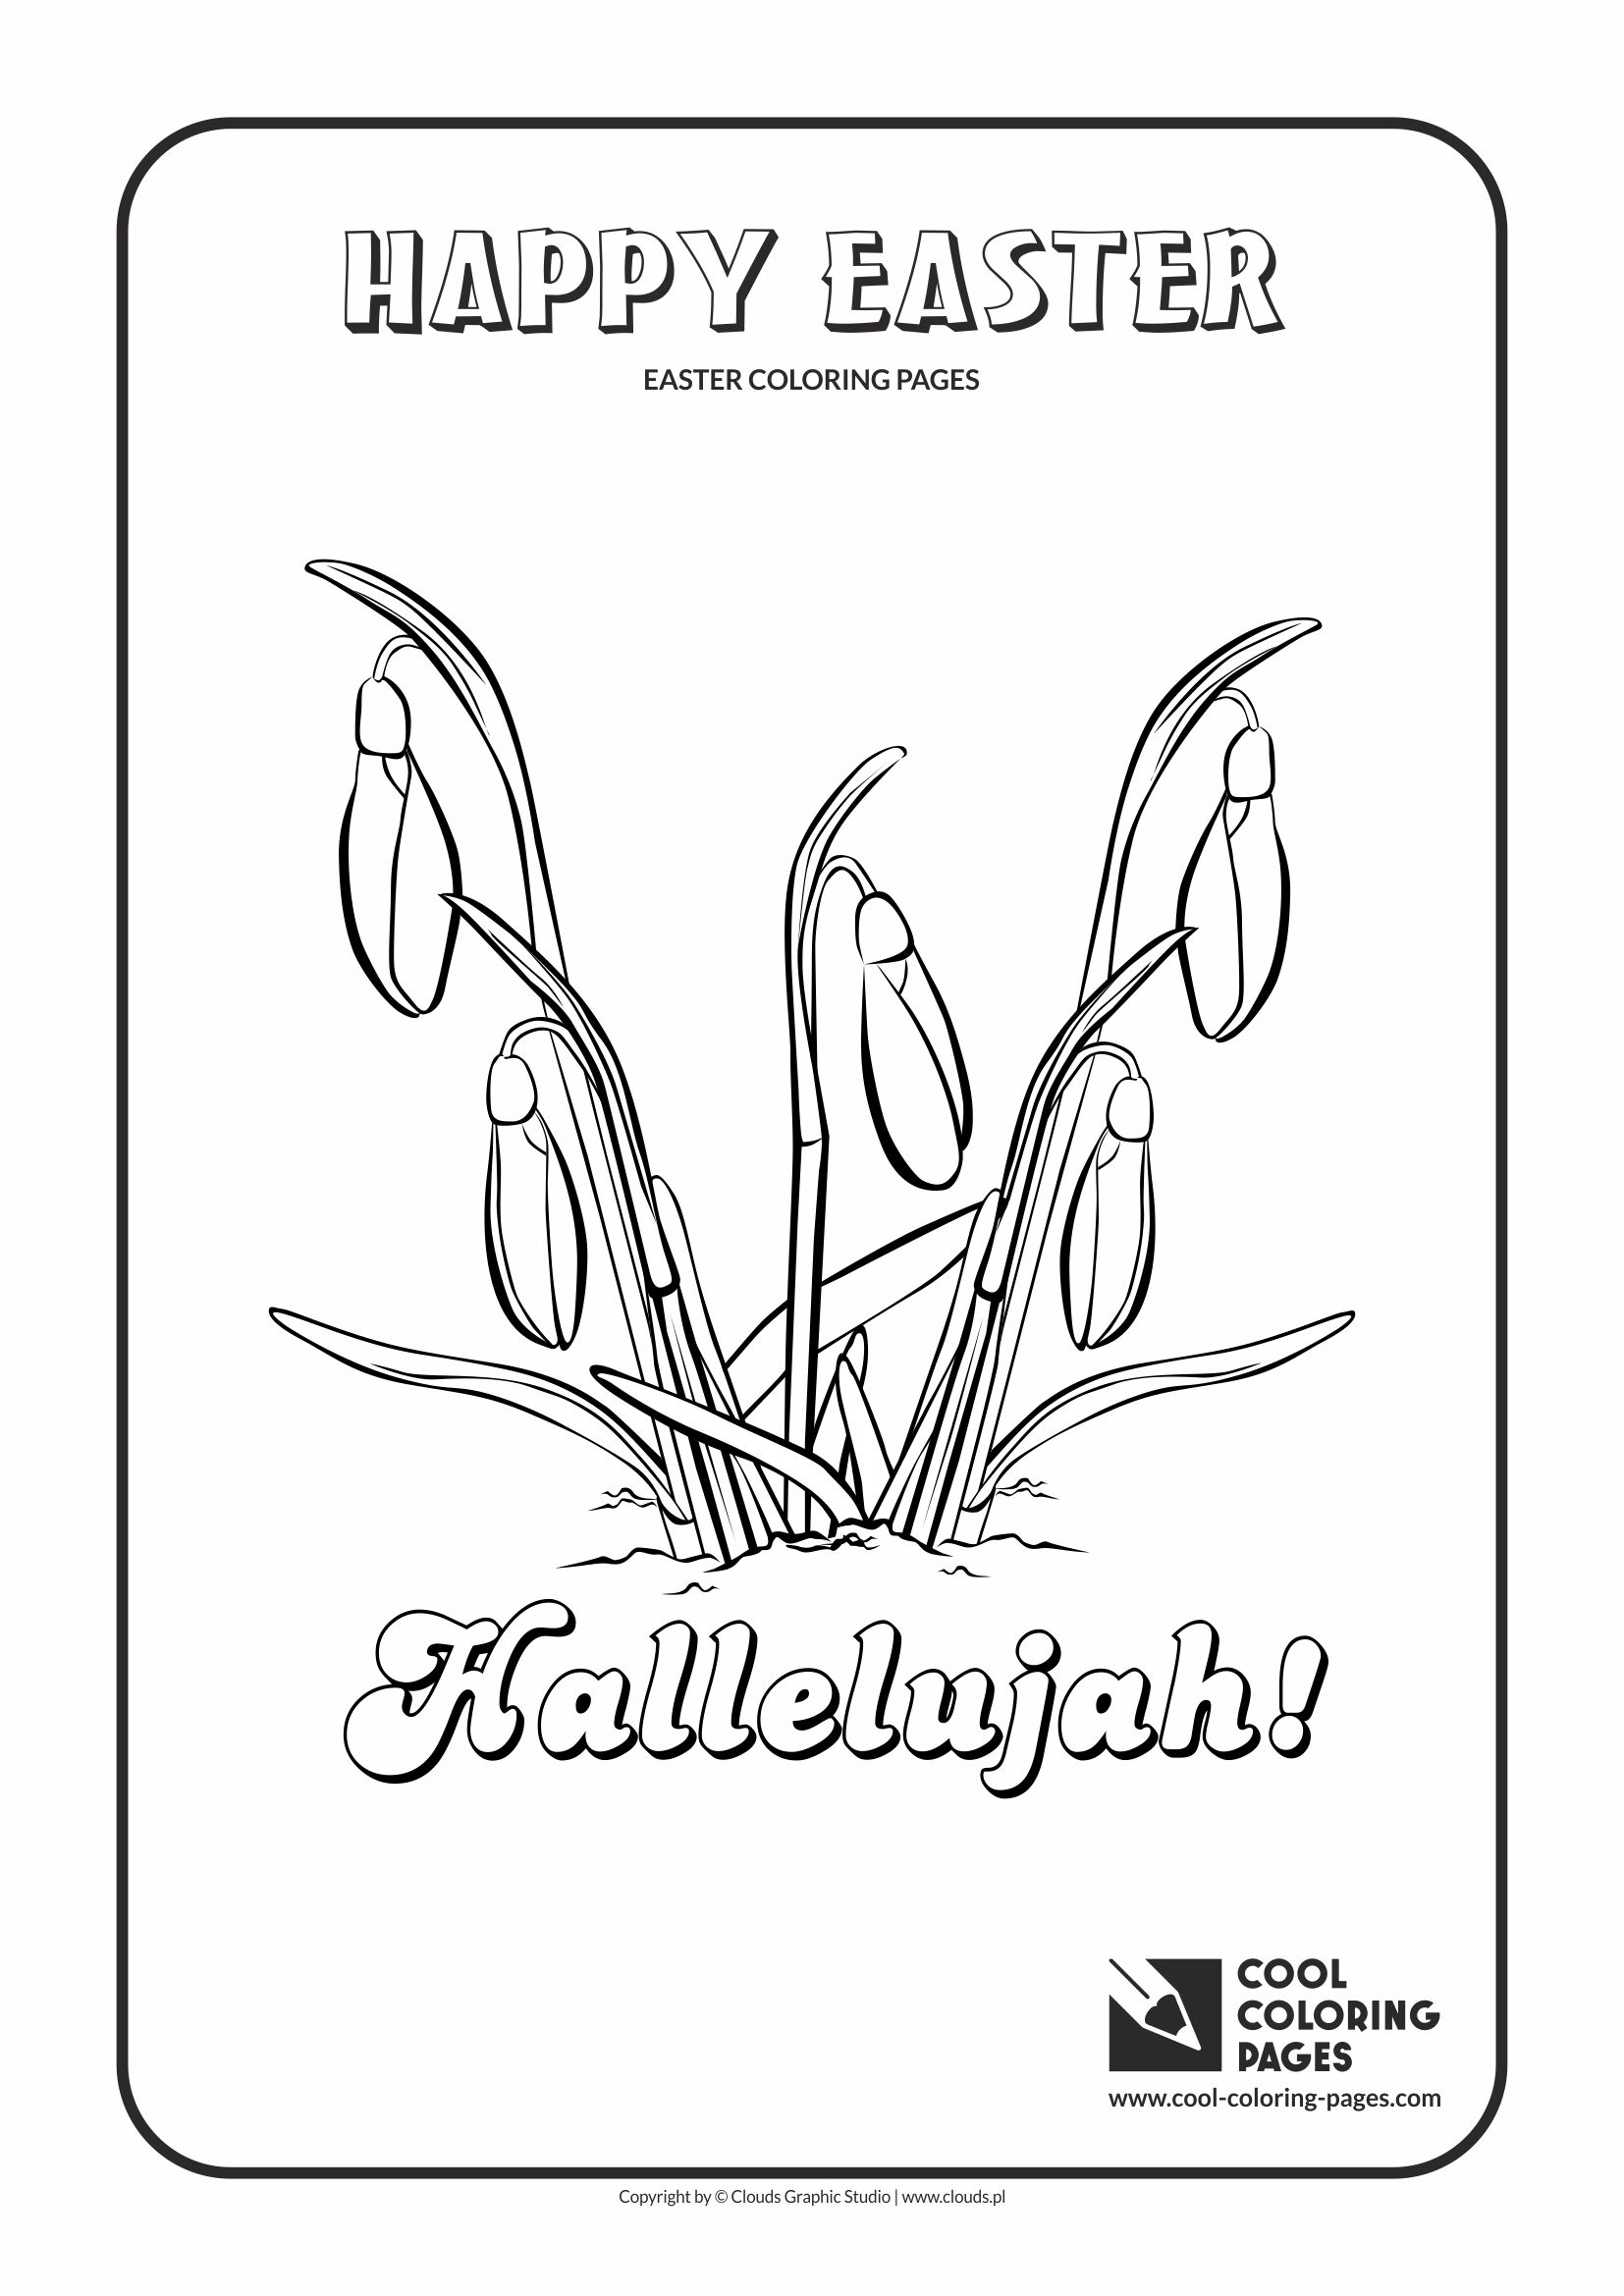 Cool Coloring Pages - Holidays / Easter flowers / Coloring page with Easter flowers